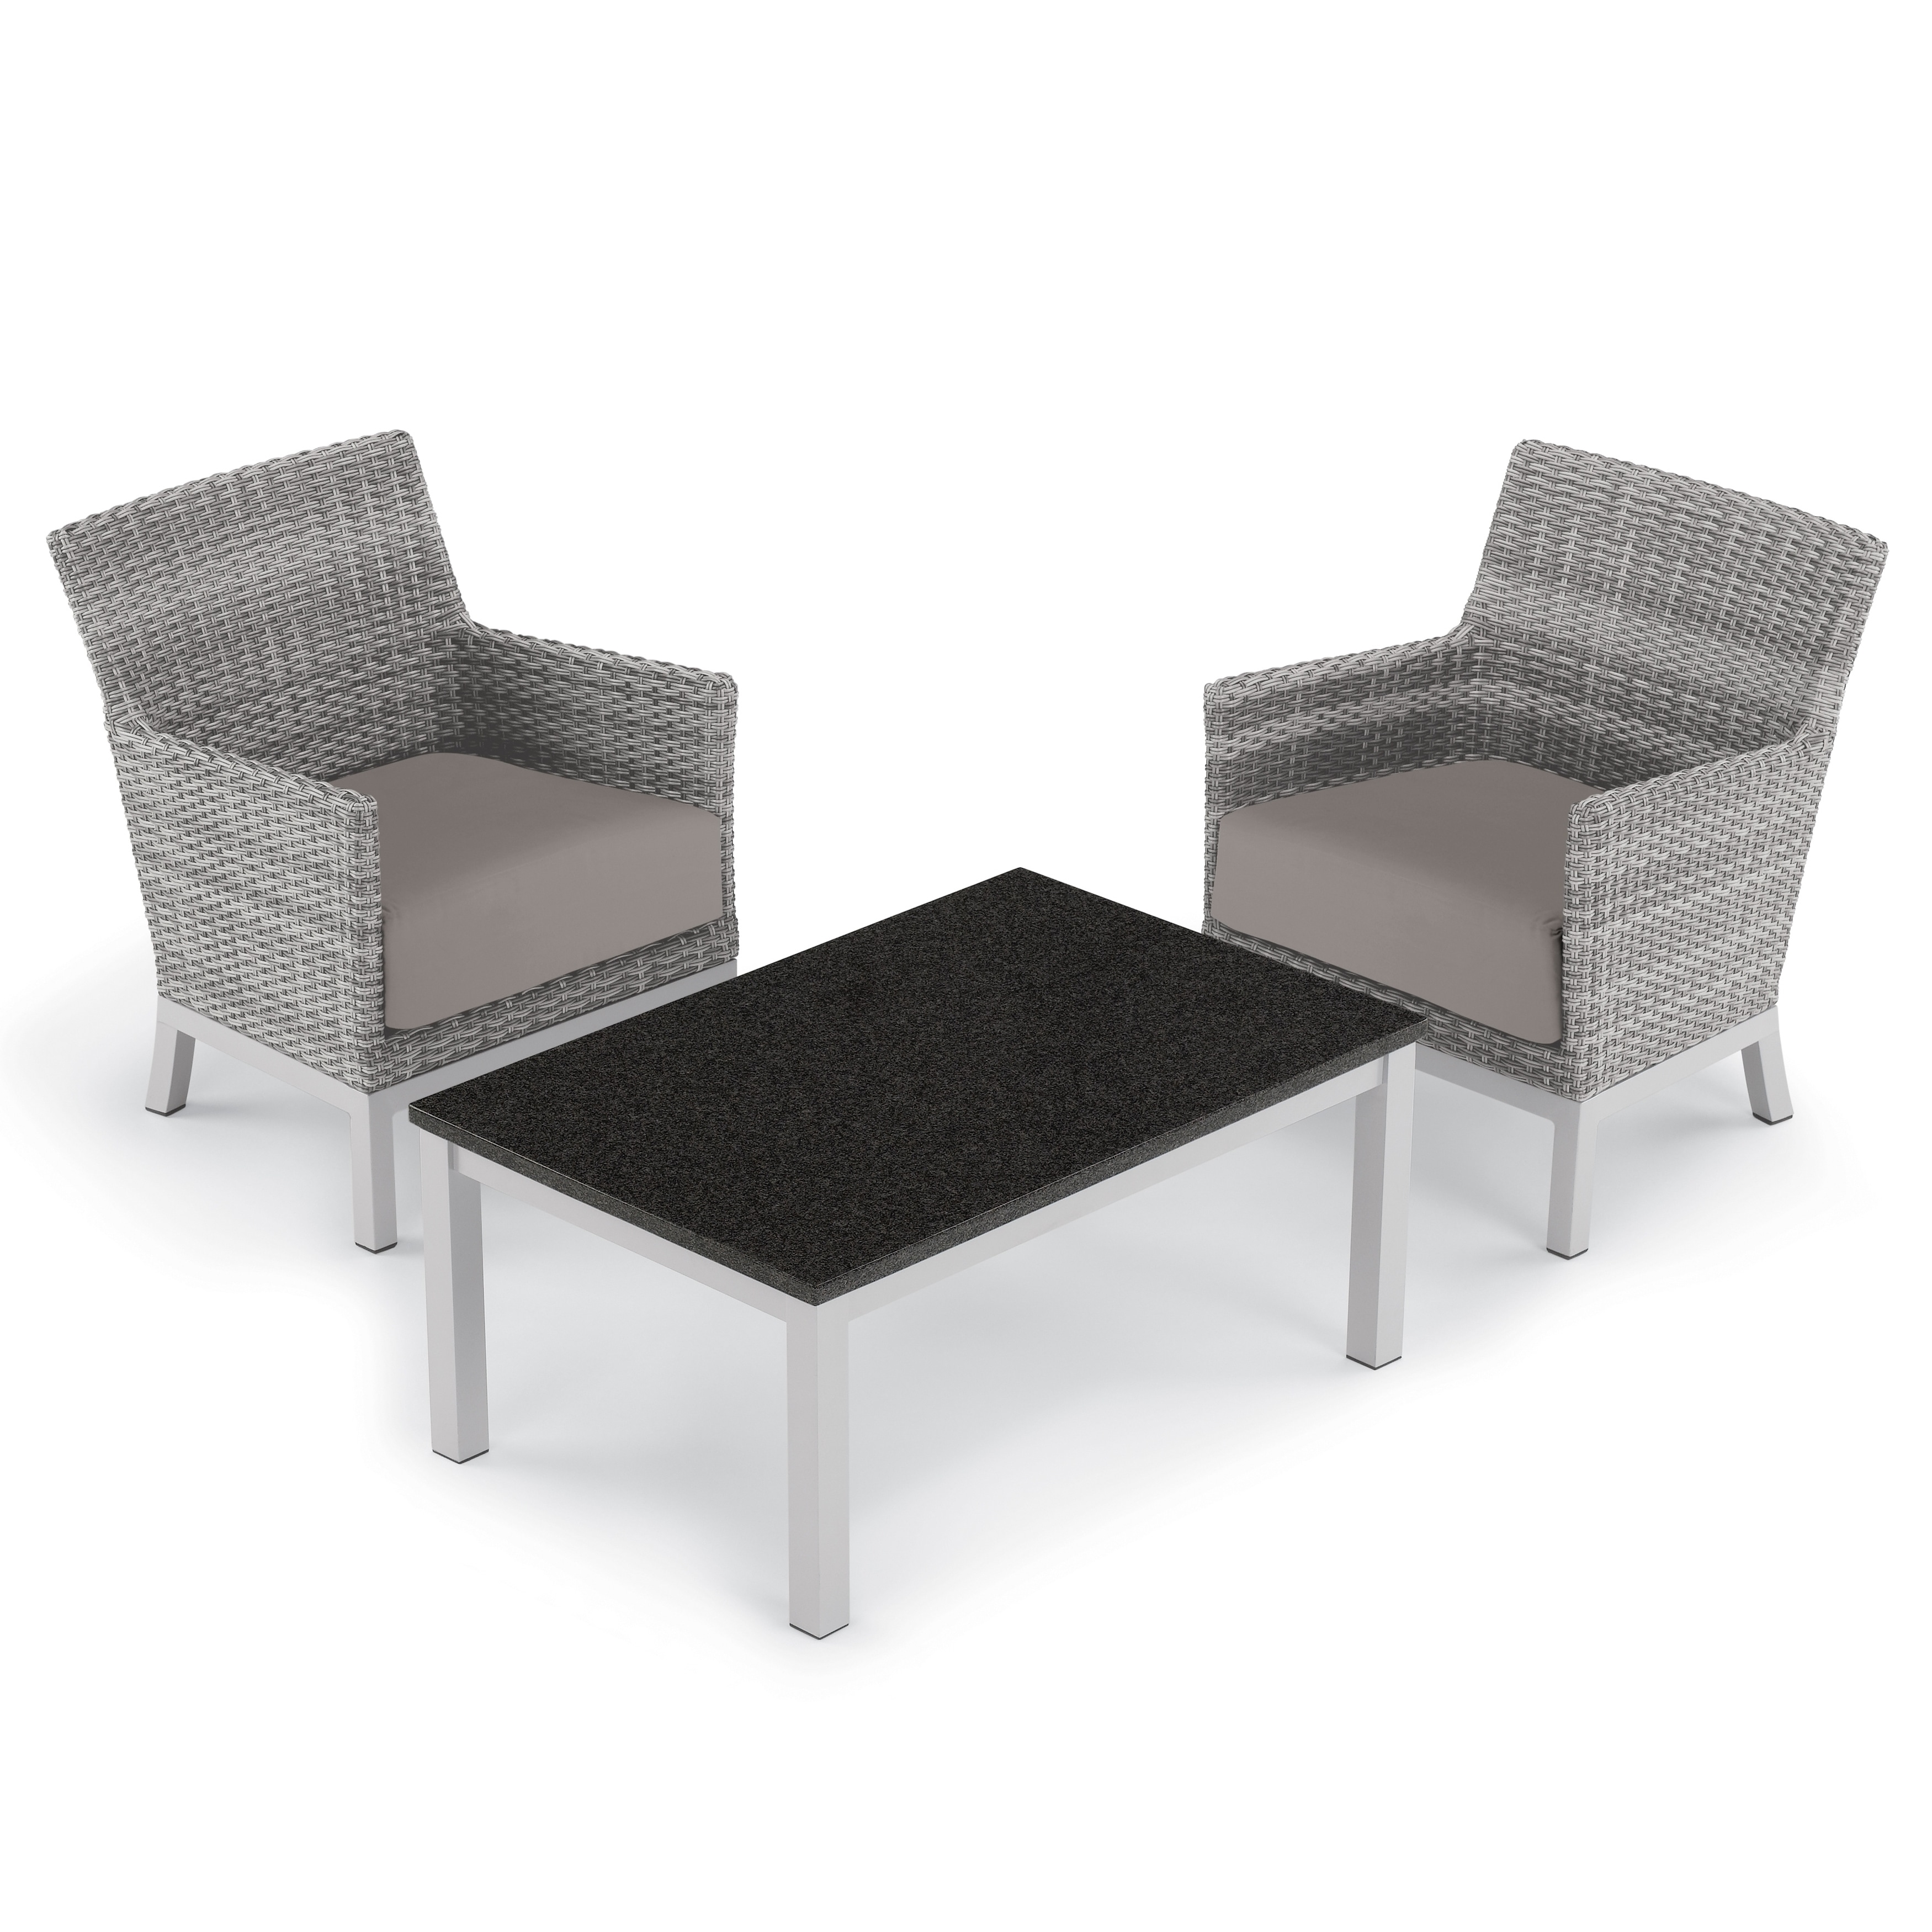 Oxford Garden Argento 3-piece Resin Wicker Club Chair and Travira Coffee Lite-core Table Set - Stone Cushions